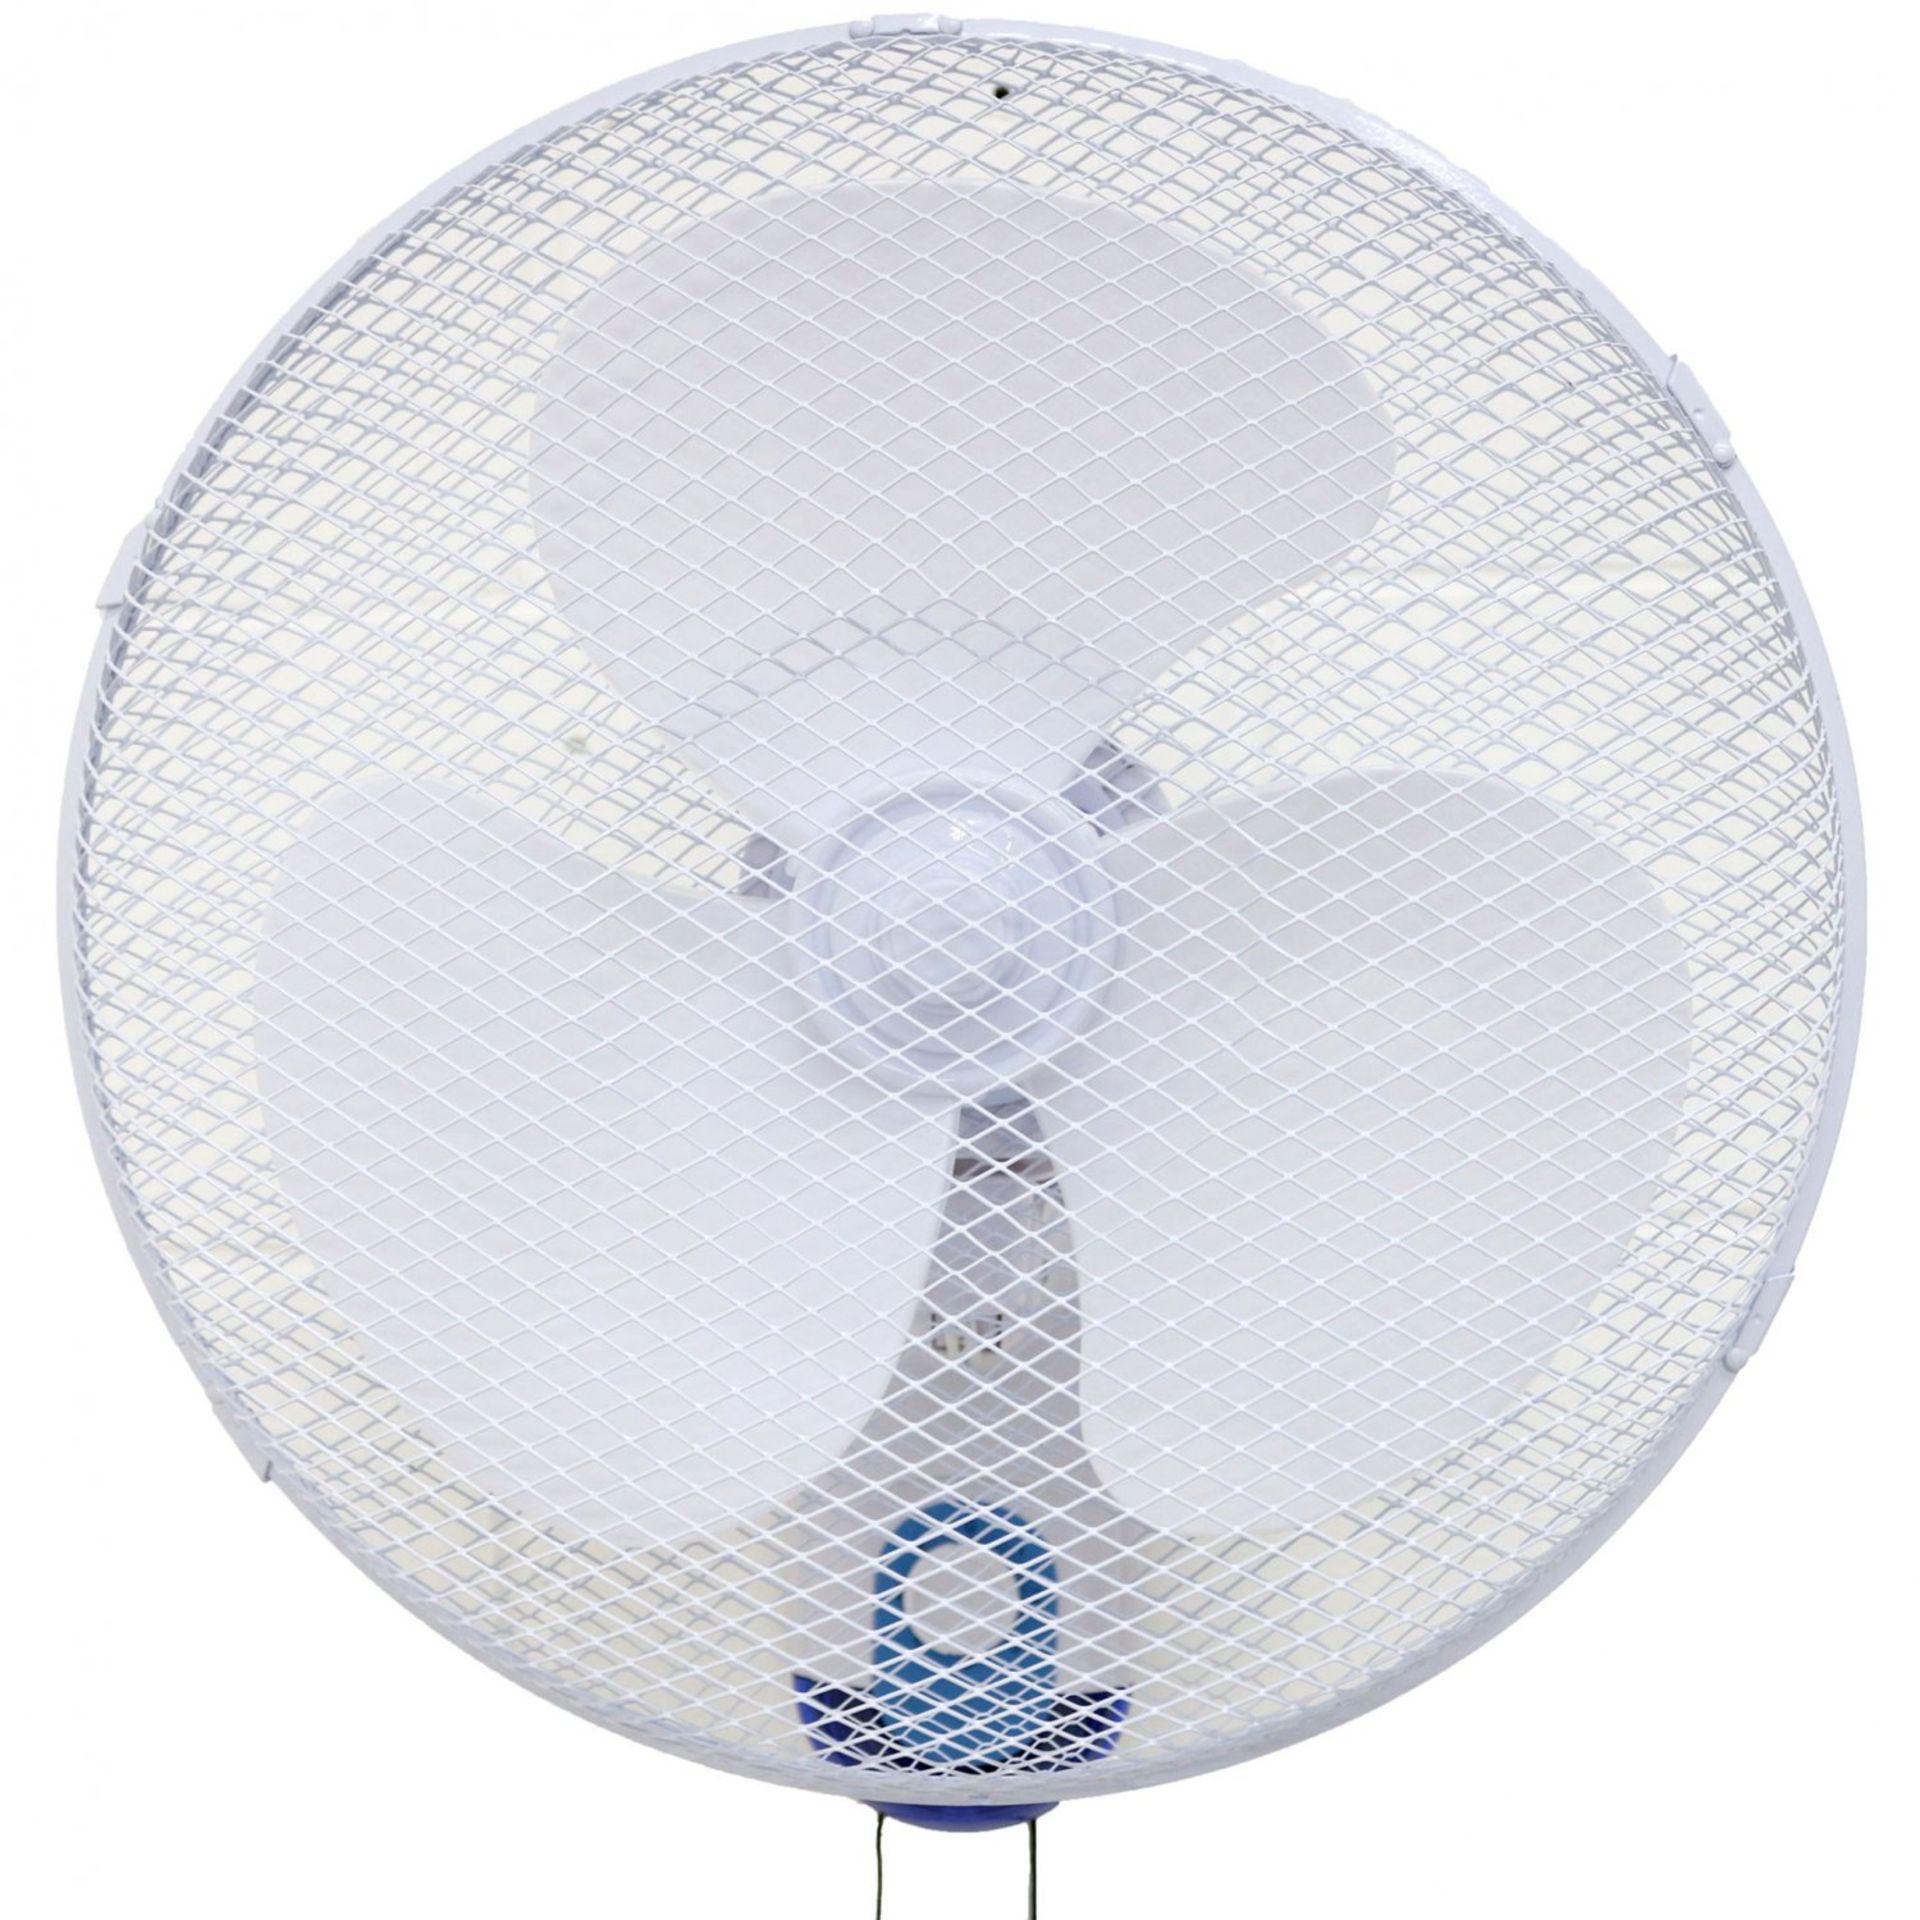 (LF235) 16" Wall Mounted Fan Stay cool this year with the 16" Wall Mounted Fan - fitted with... - Bild 2 aus 2